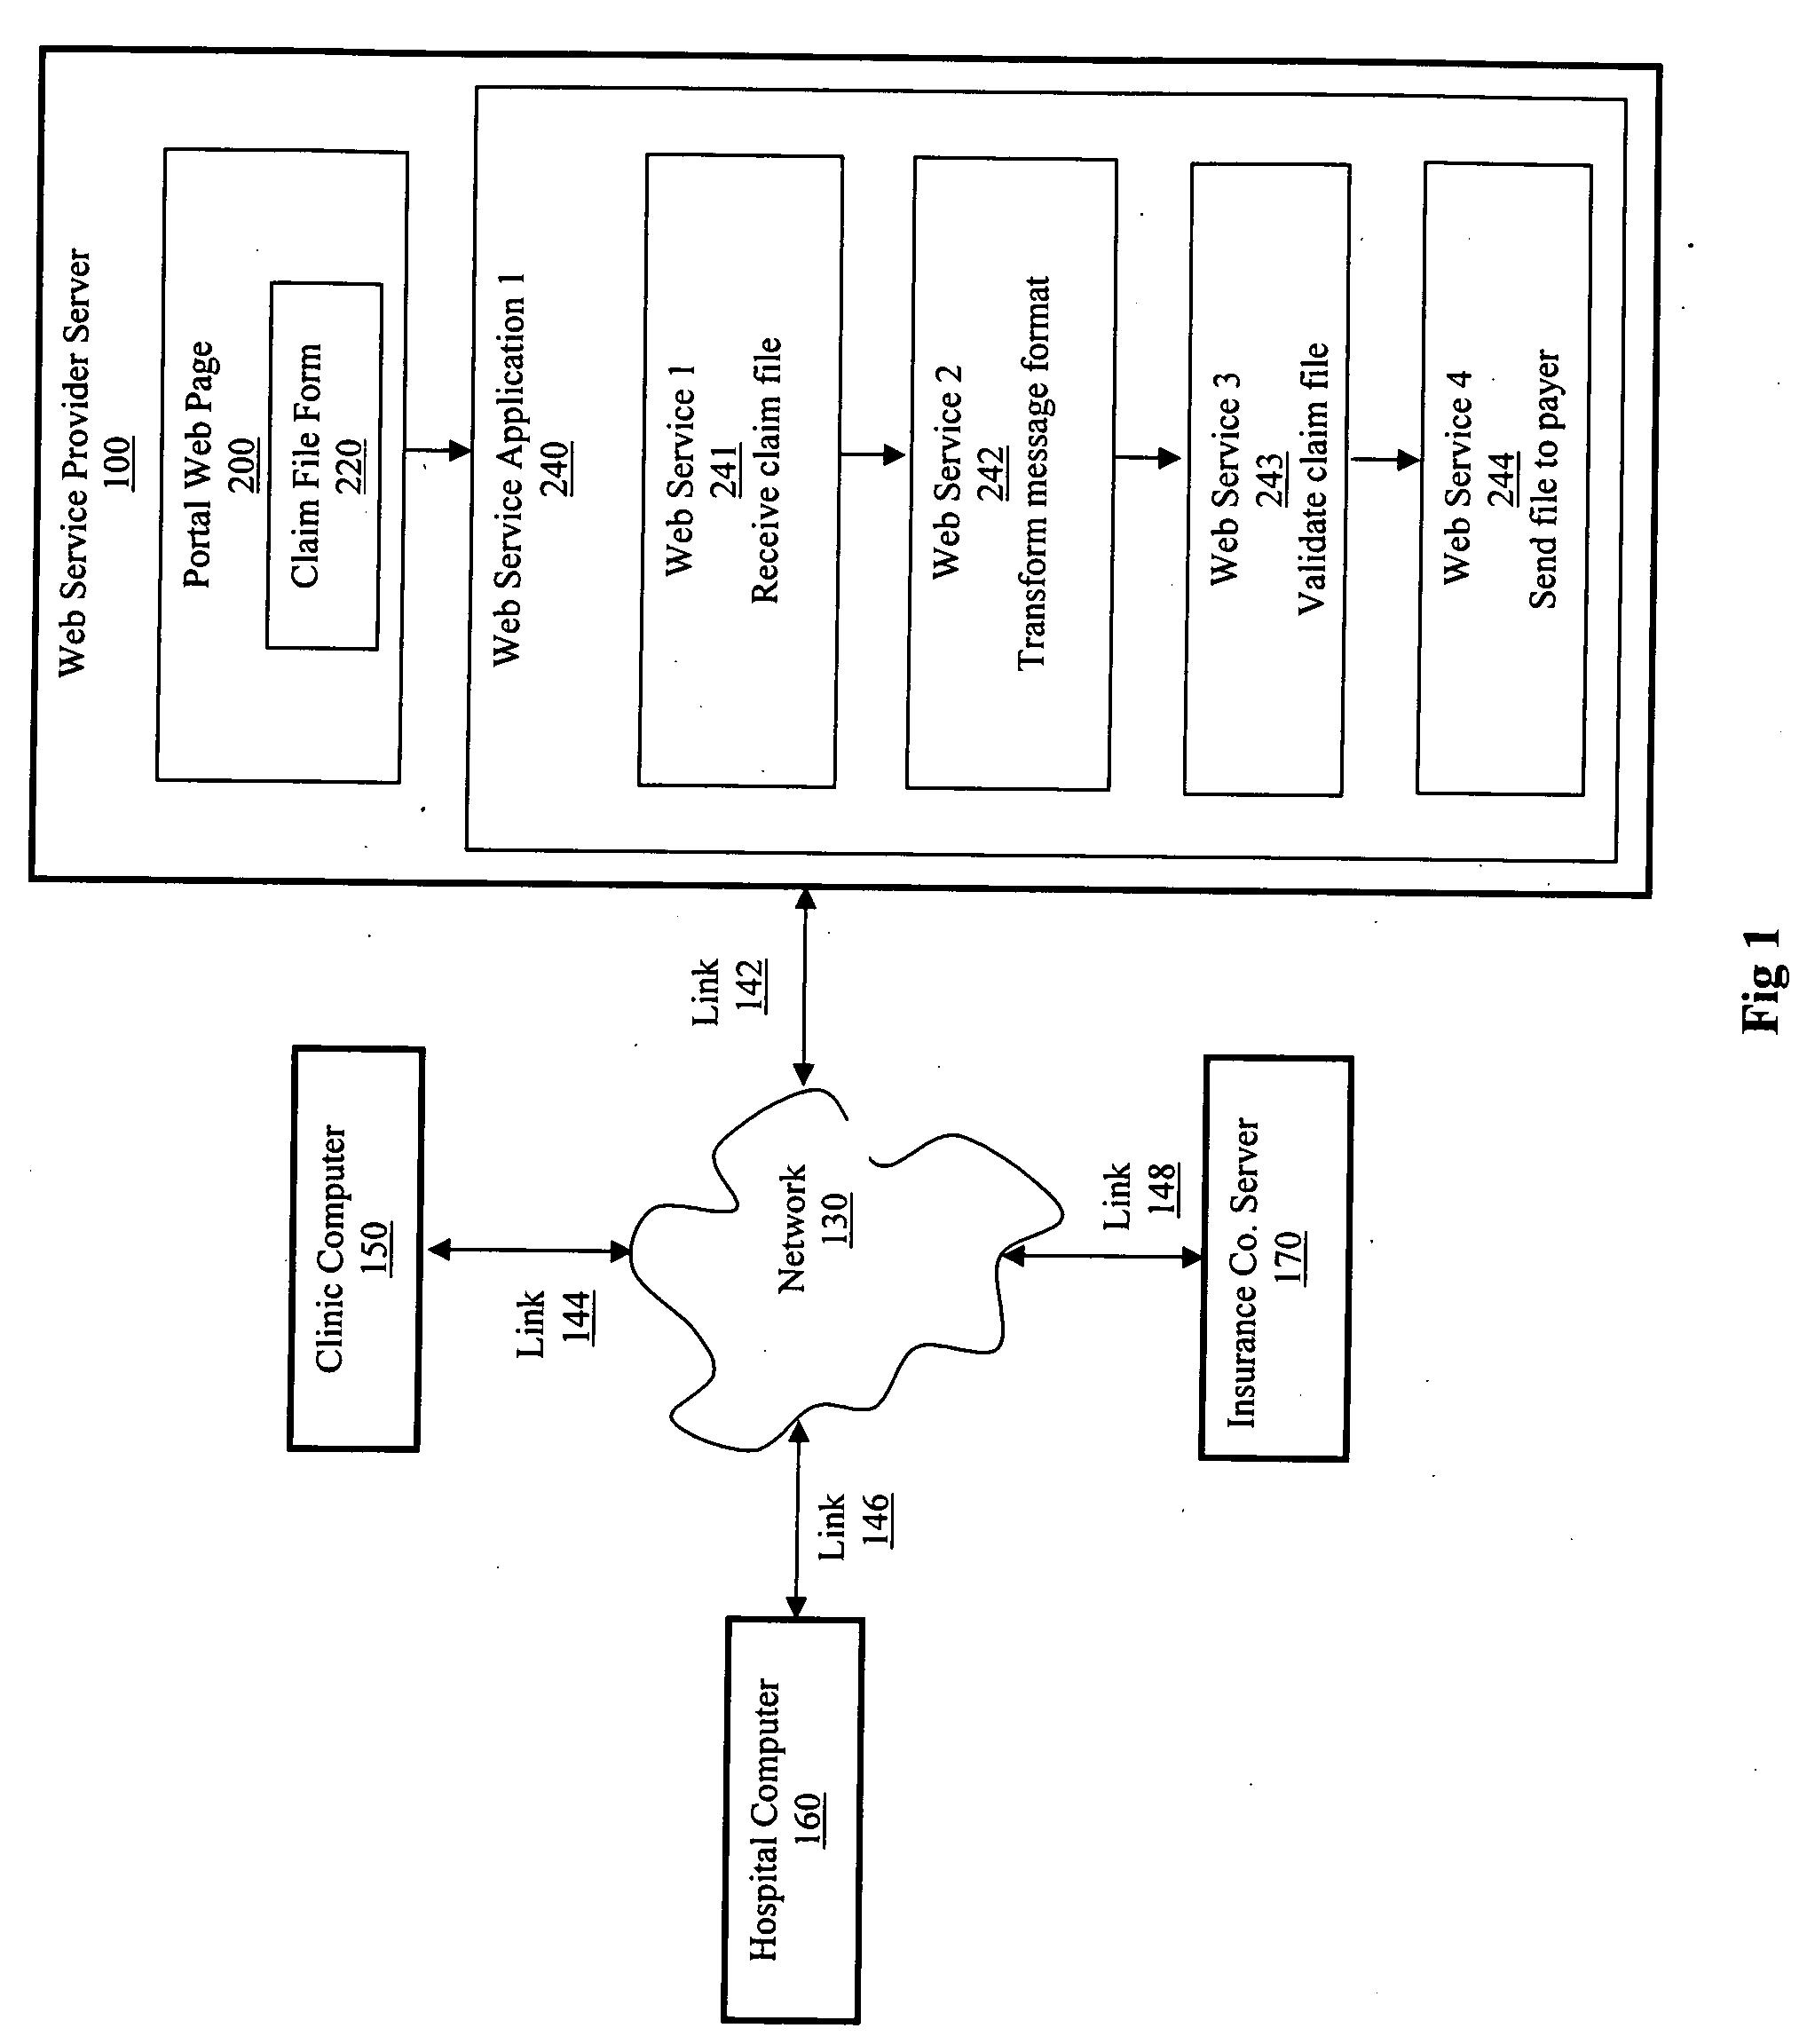 System and method for a packaging and deployment mechanism for Web service applications